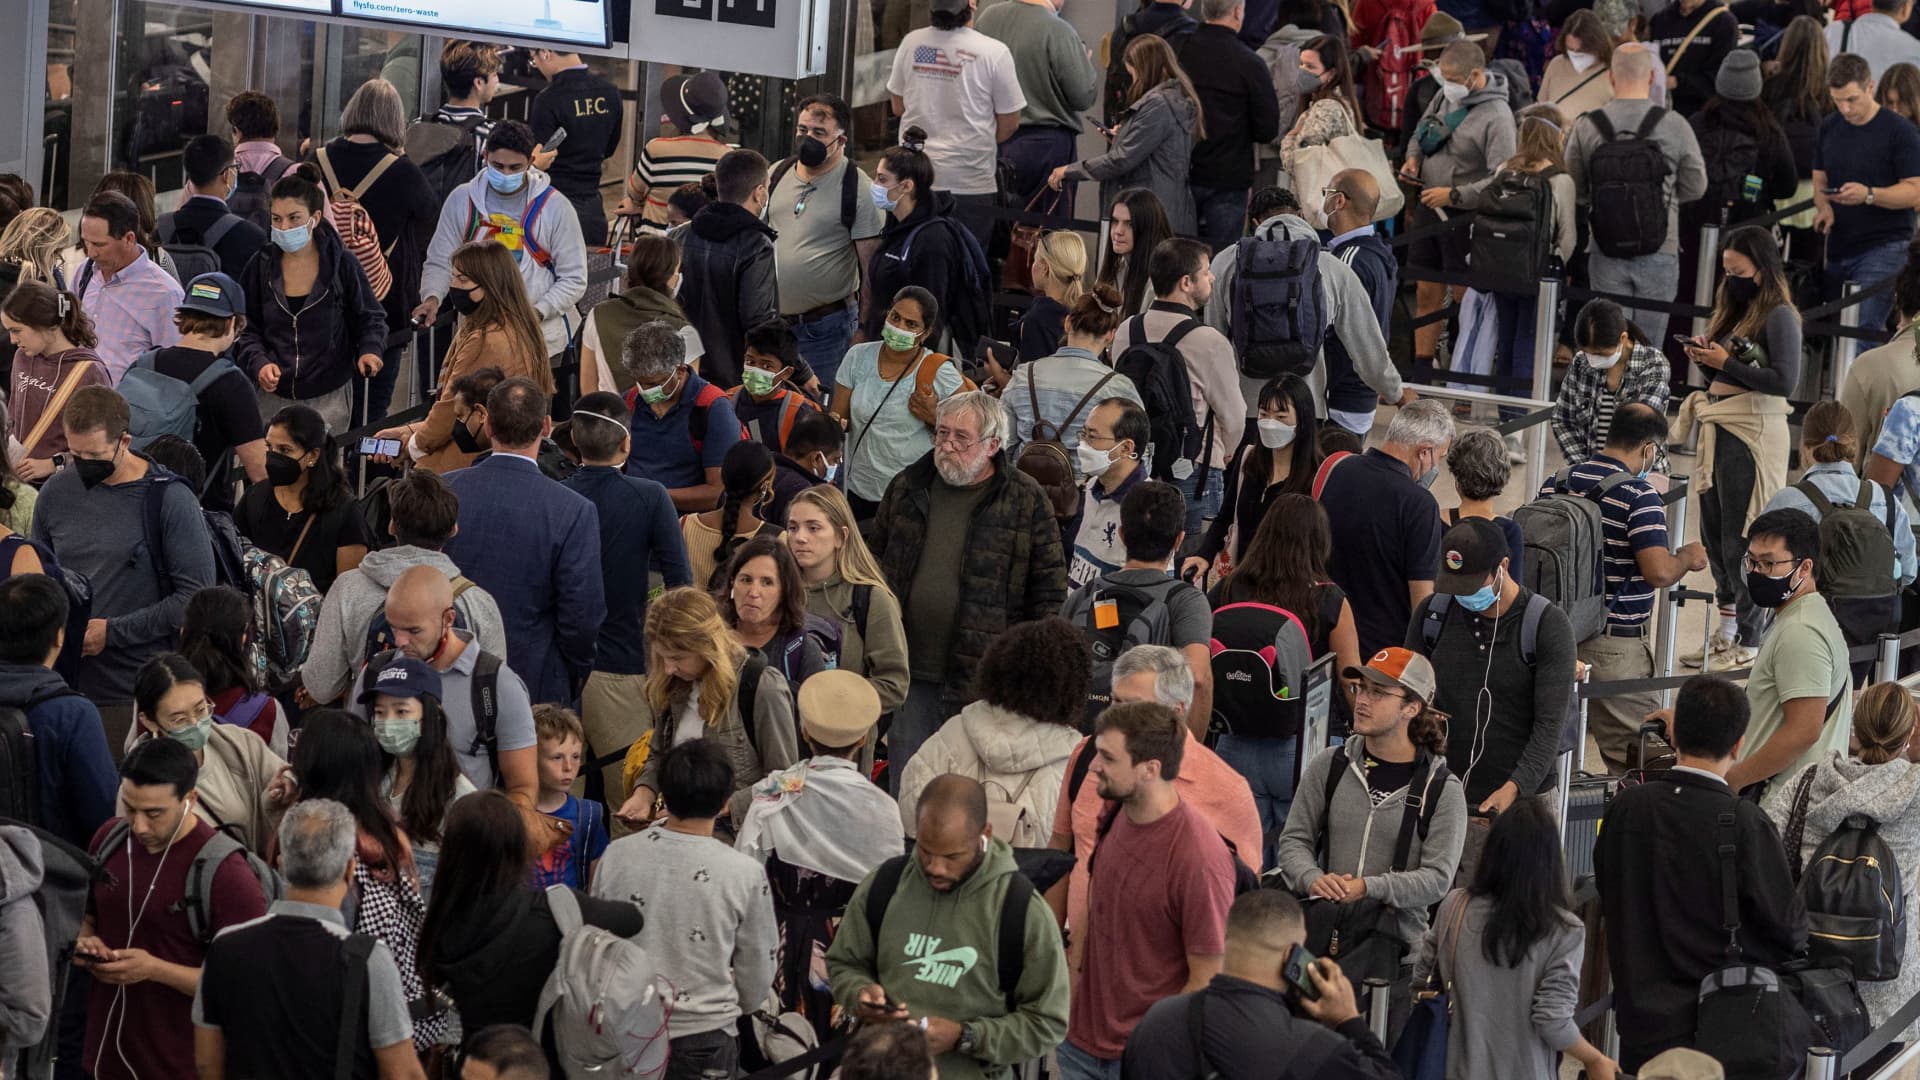 Travelers make their way through security check at San Francisco International airpot during the start of the long July 4th holiday weekend in San Francisco, California, June, 30, 2022.